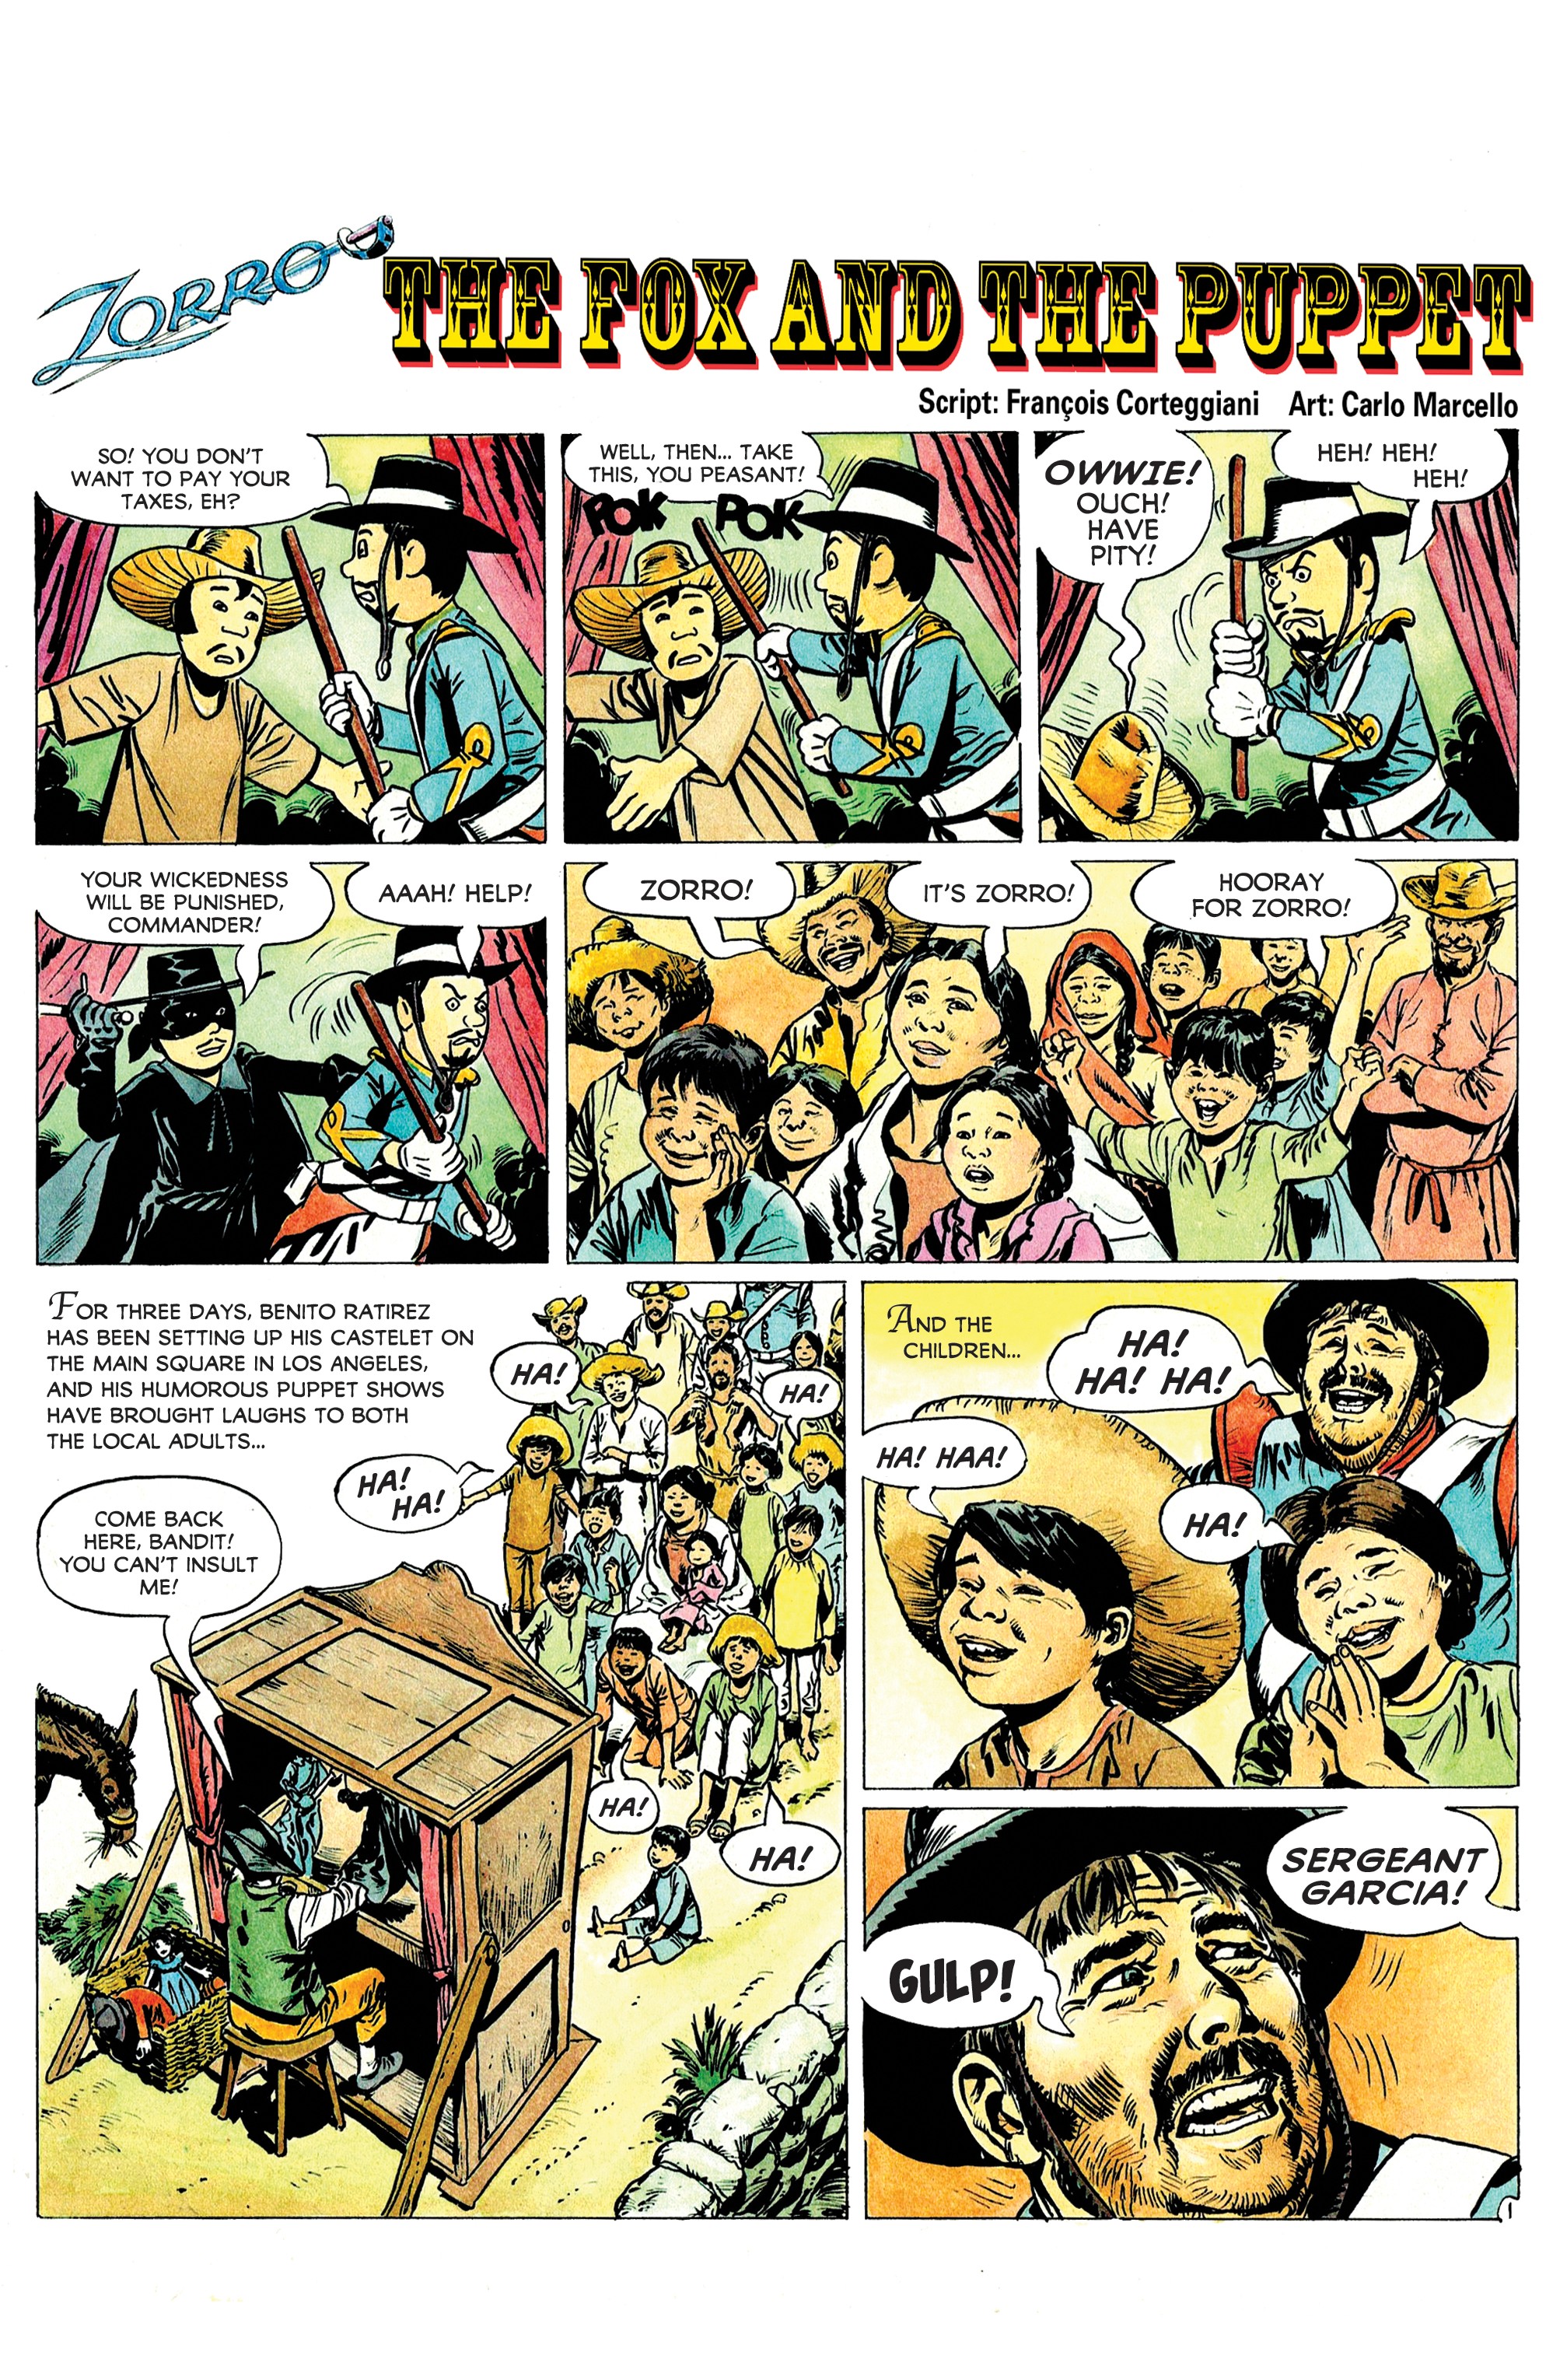 Zorro: Legendary Adventures Book 2 (2019): Chapter 1 - Page 3